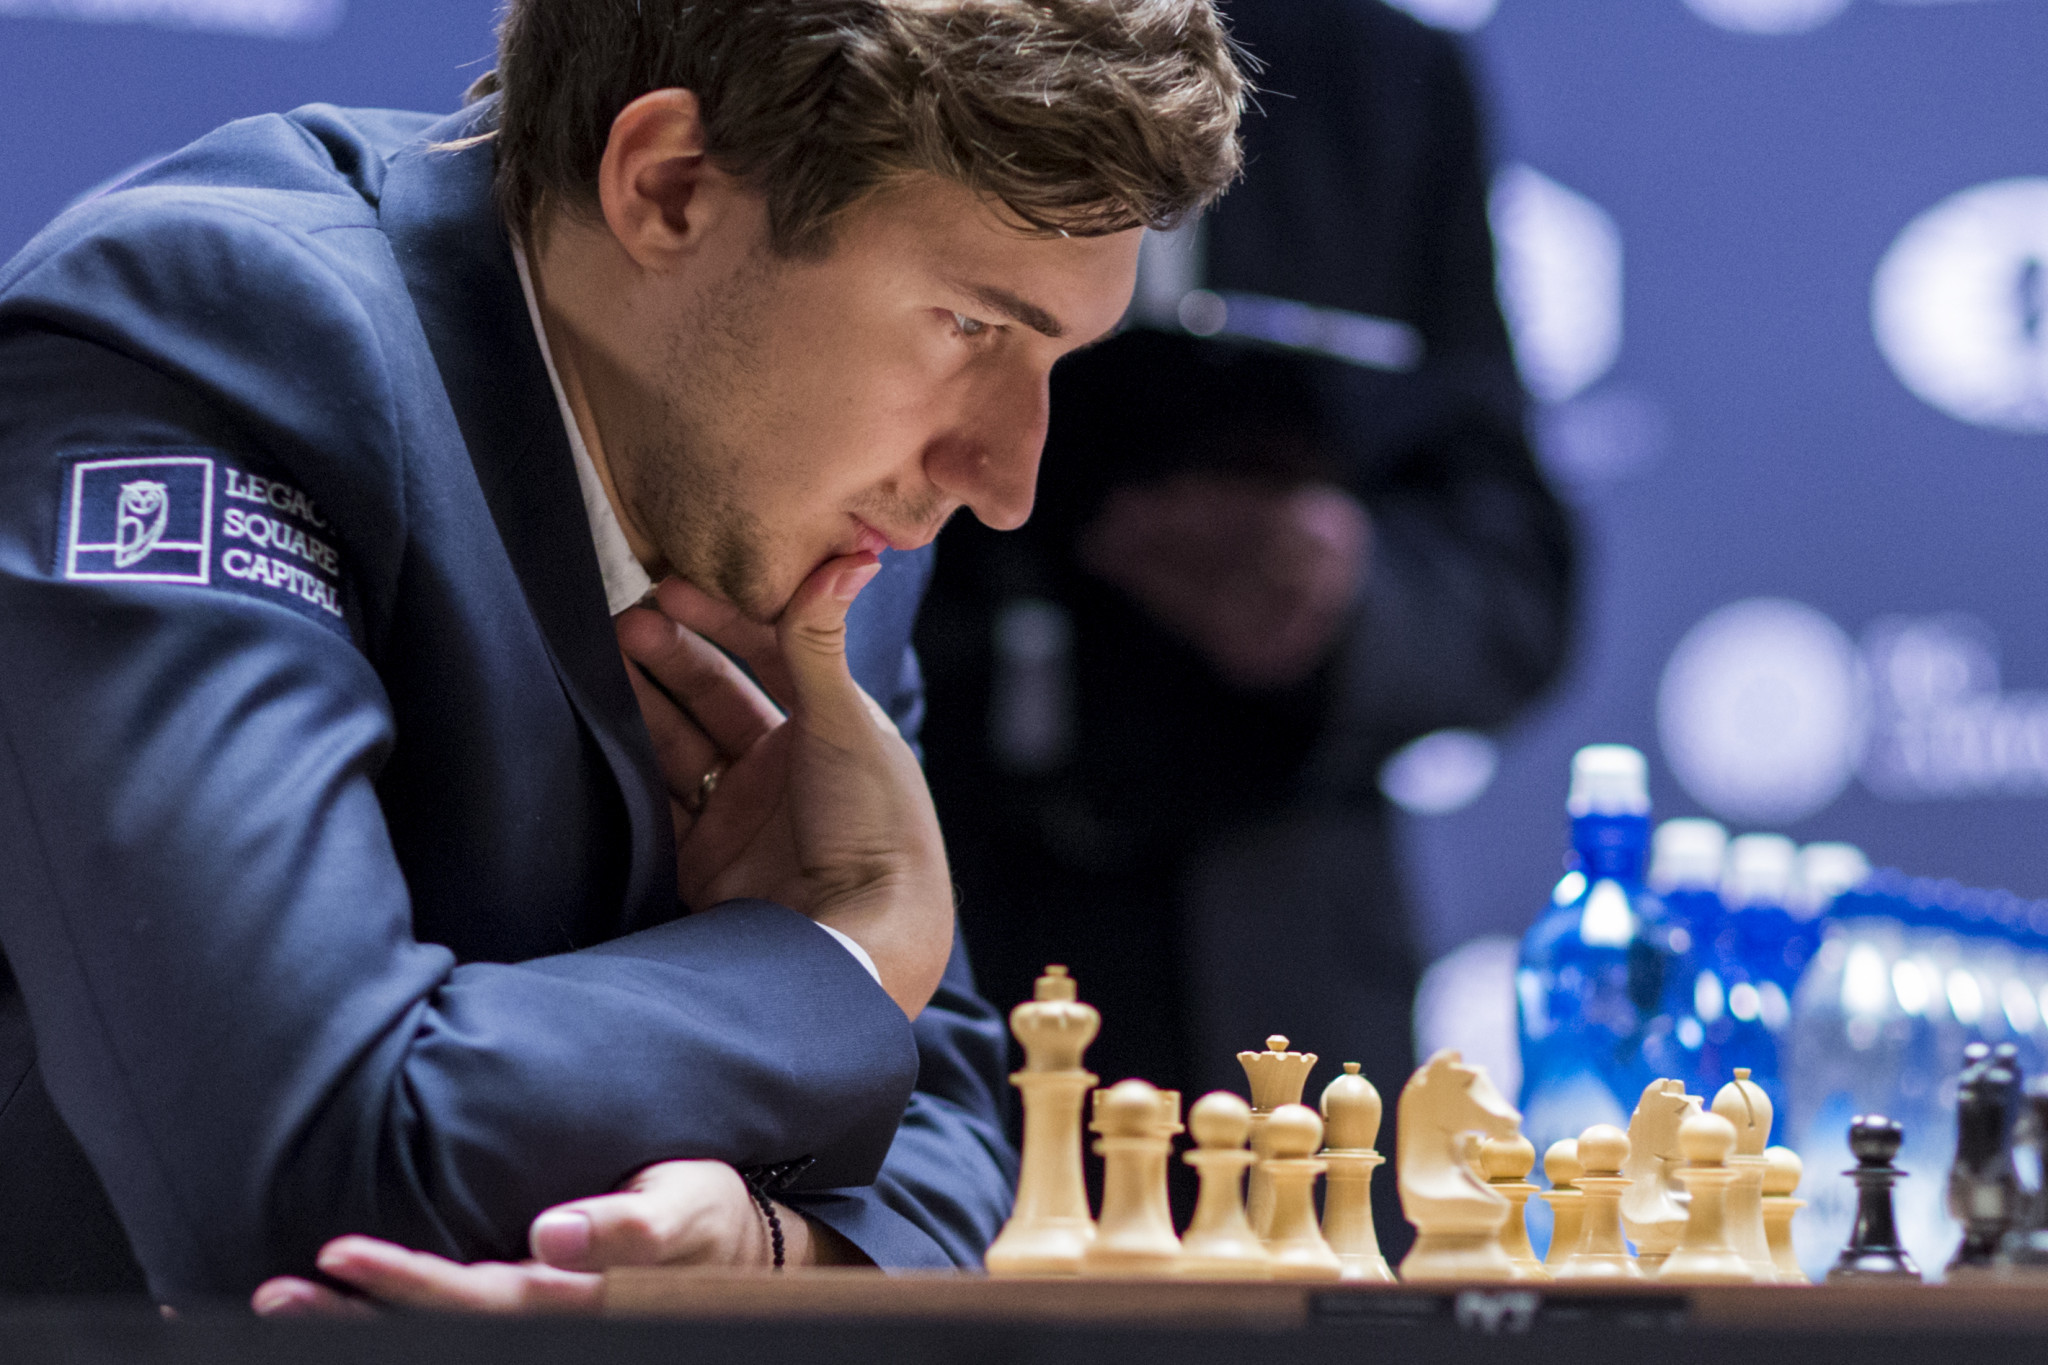 Russian players have been able to play at individual chess events under the FIDE flag, but Sergey Karjakin was banned for six months for pro-war statements ©Getty Images